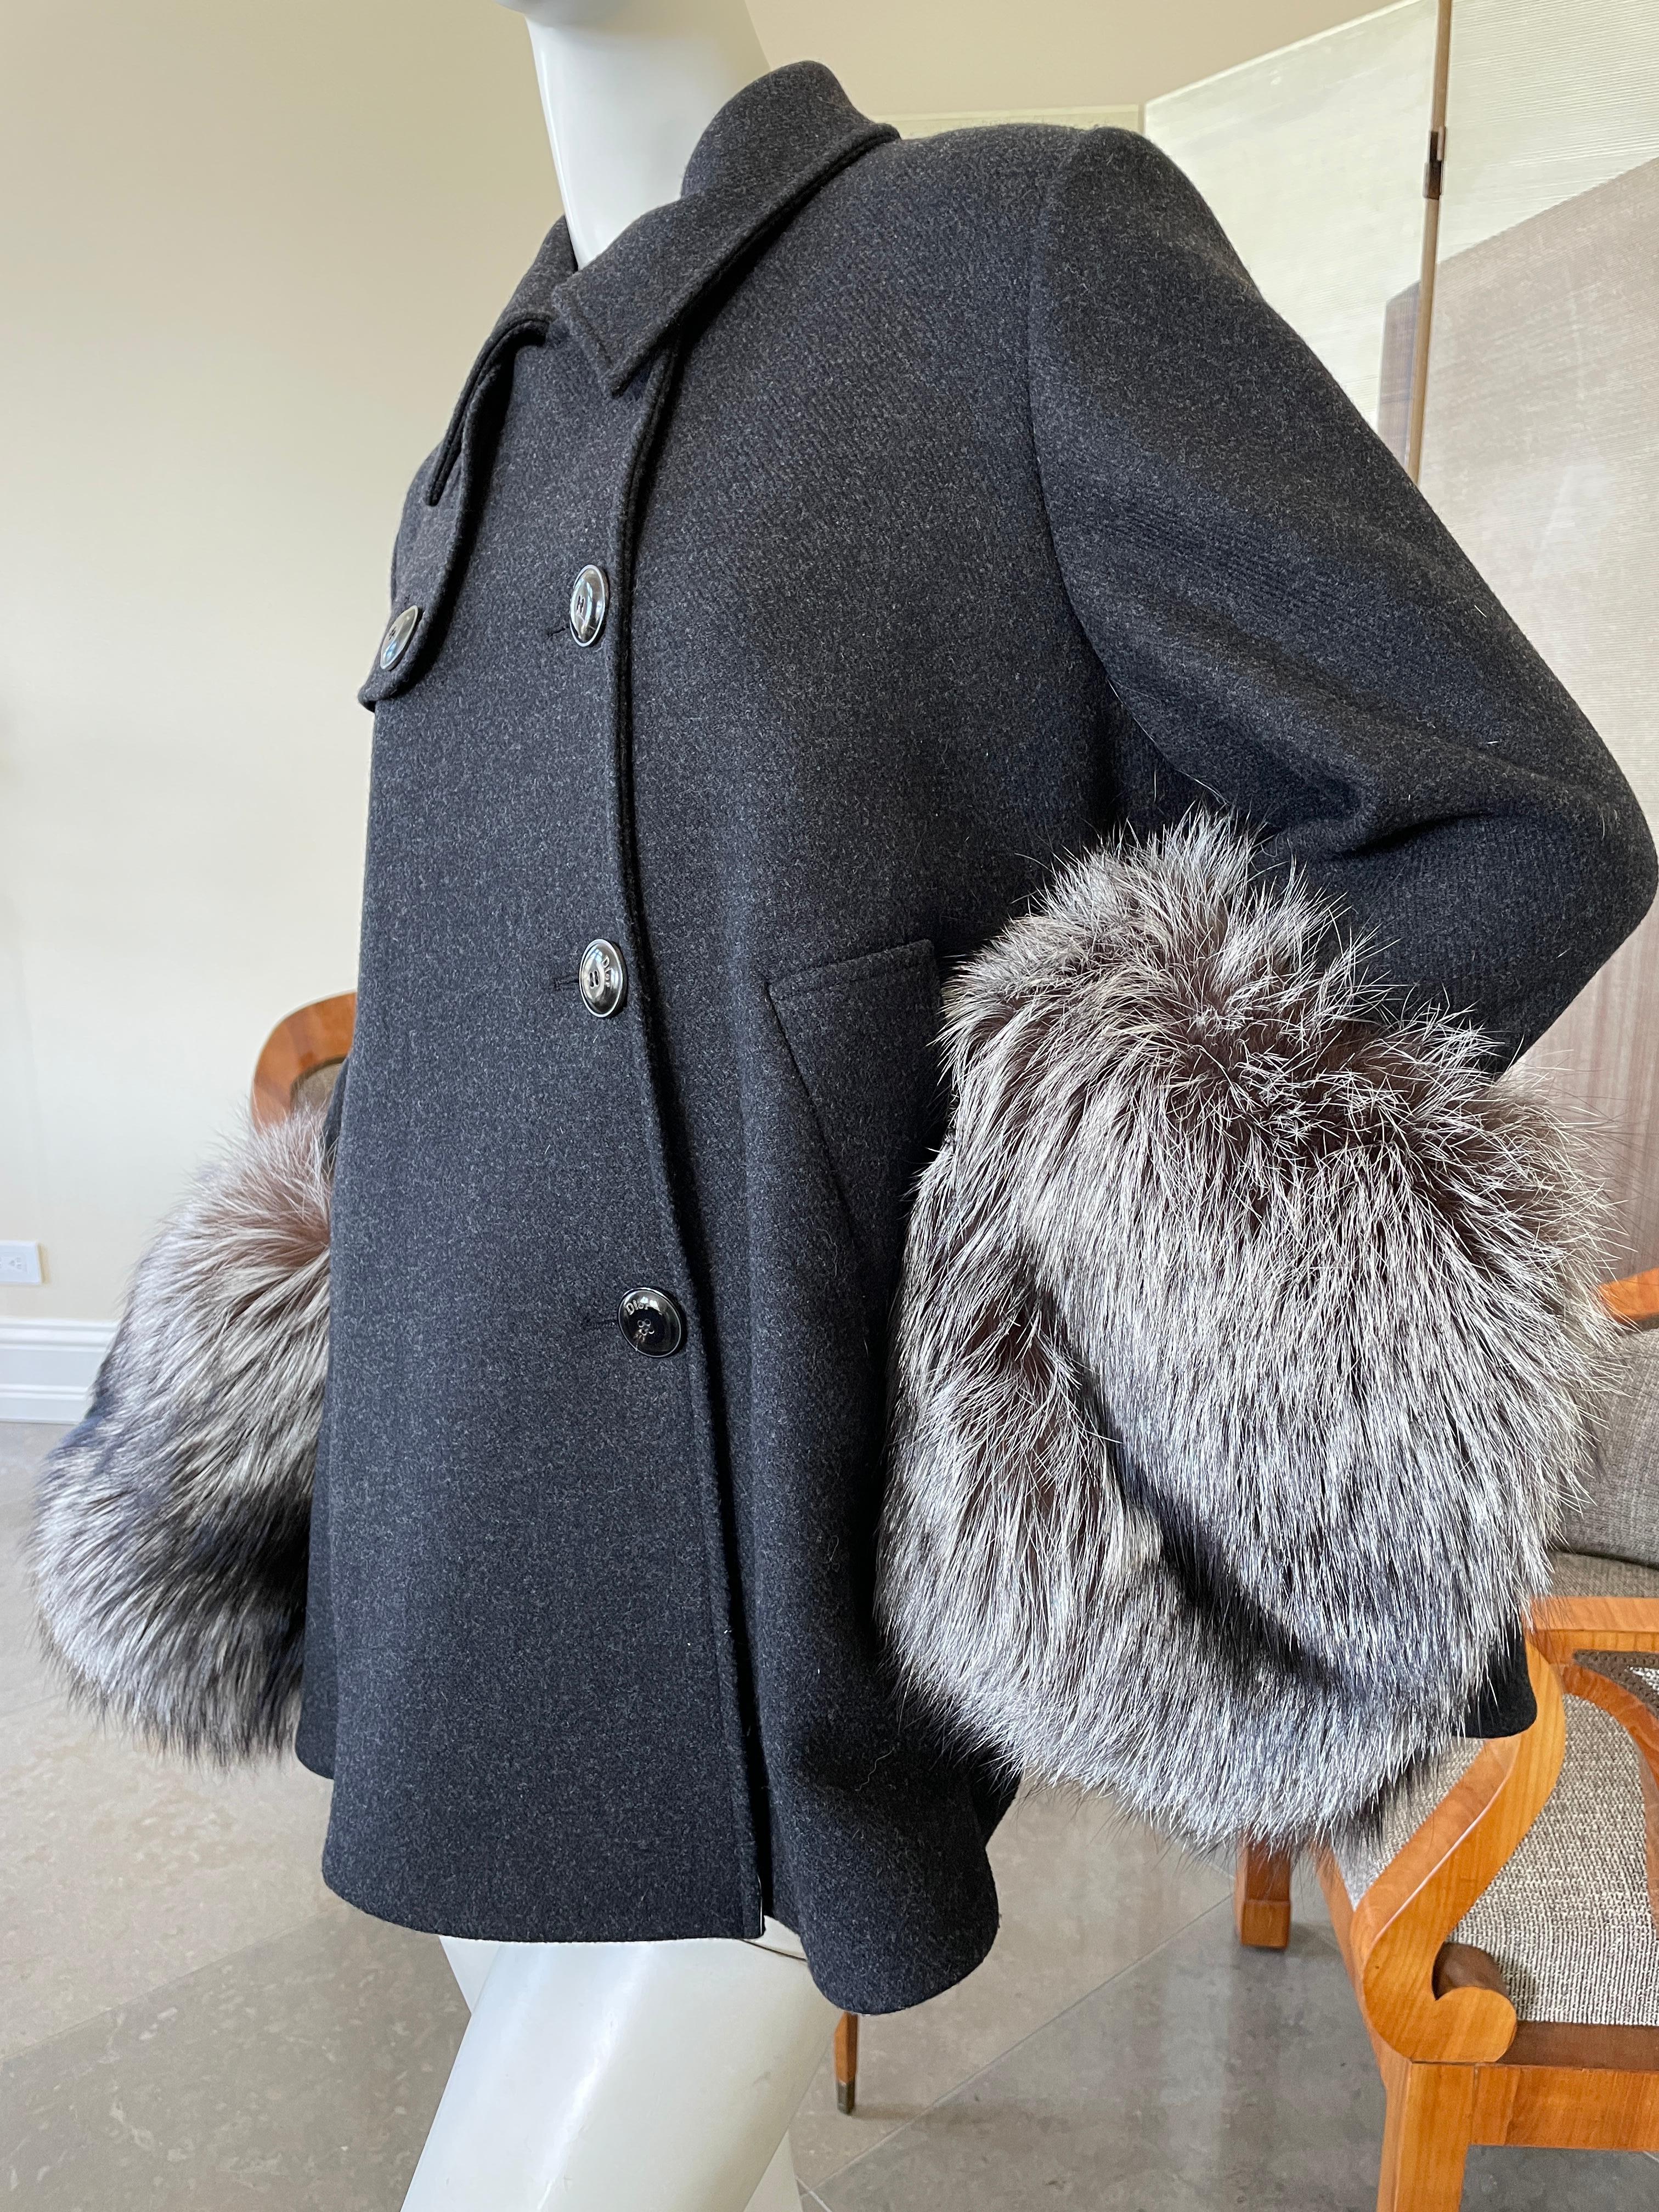 Christian Dior by Gianfranco Ferre Gray Peacoat with Fox Fur Cuffs In Excellent Condition For Sale In Cloverdale, CA